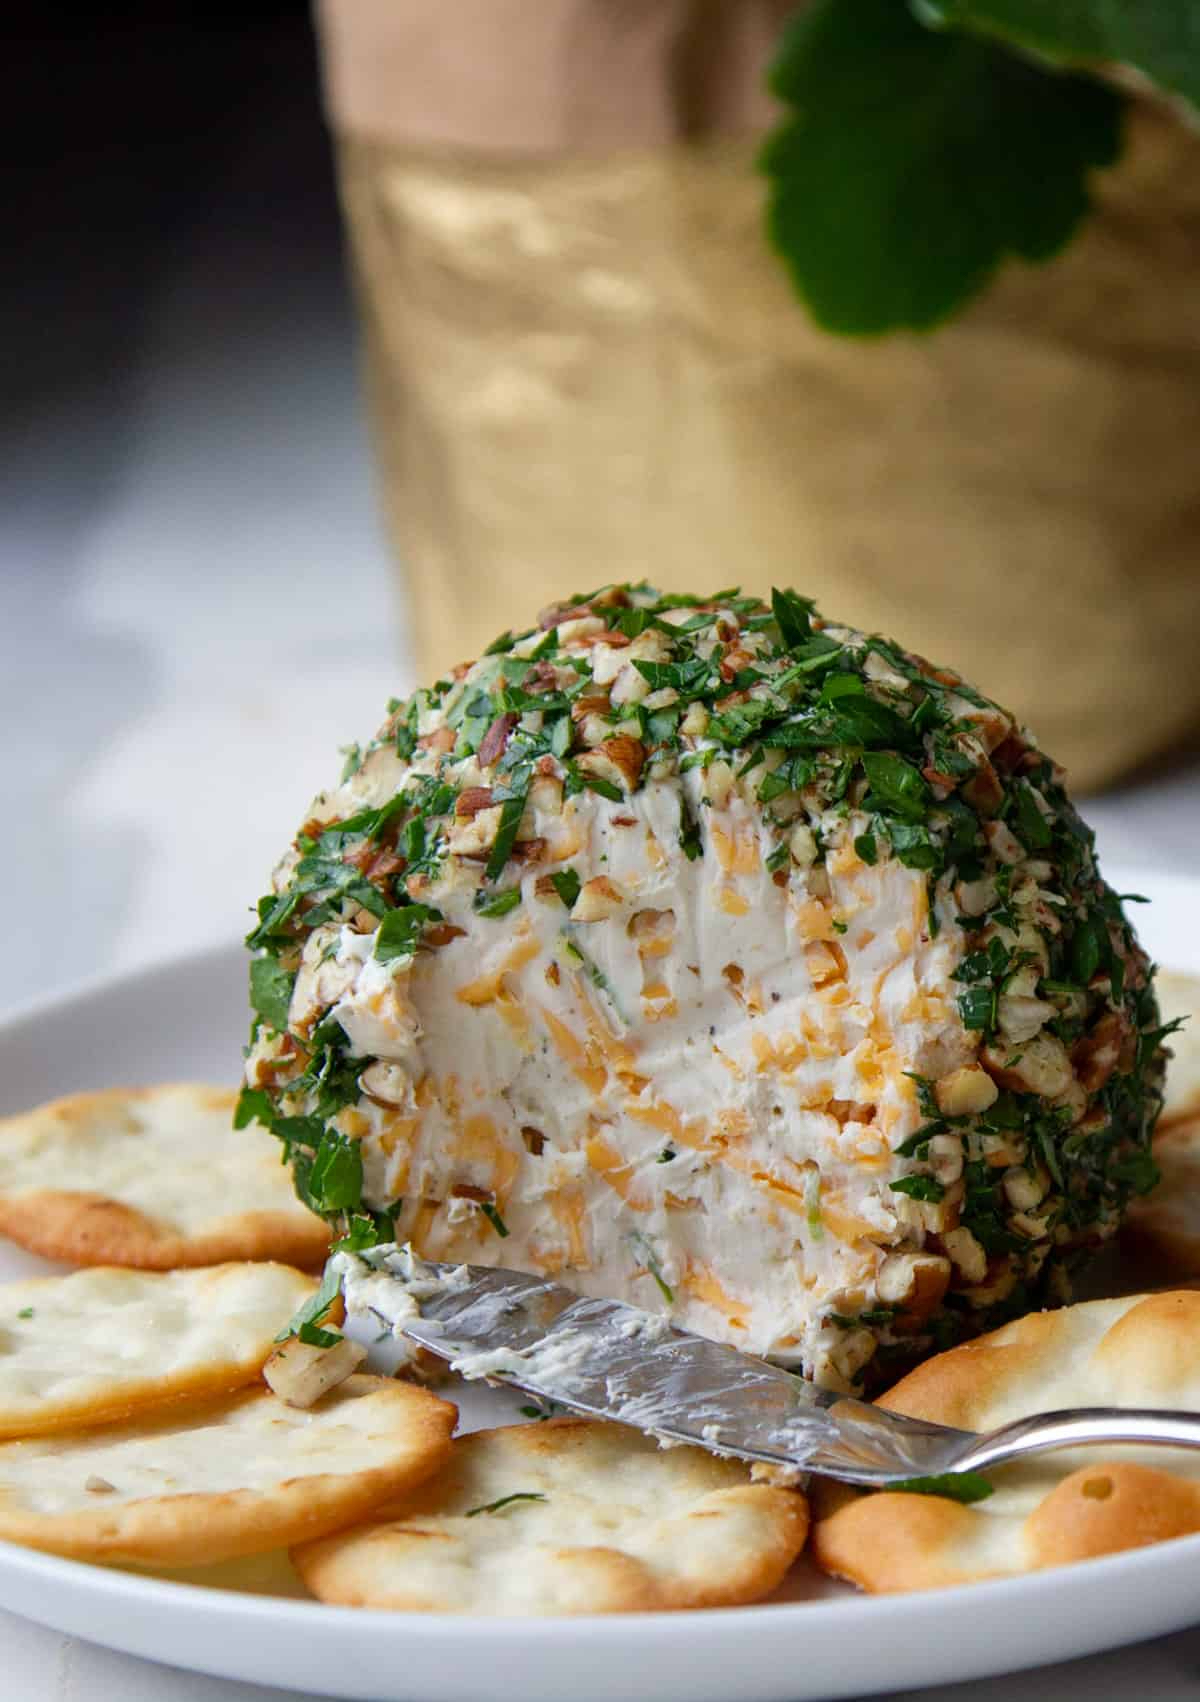 Cheese Ball With Herbs and Spices